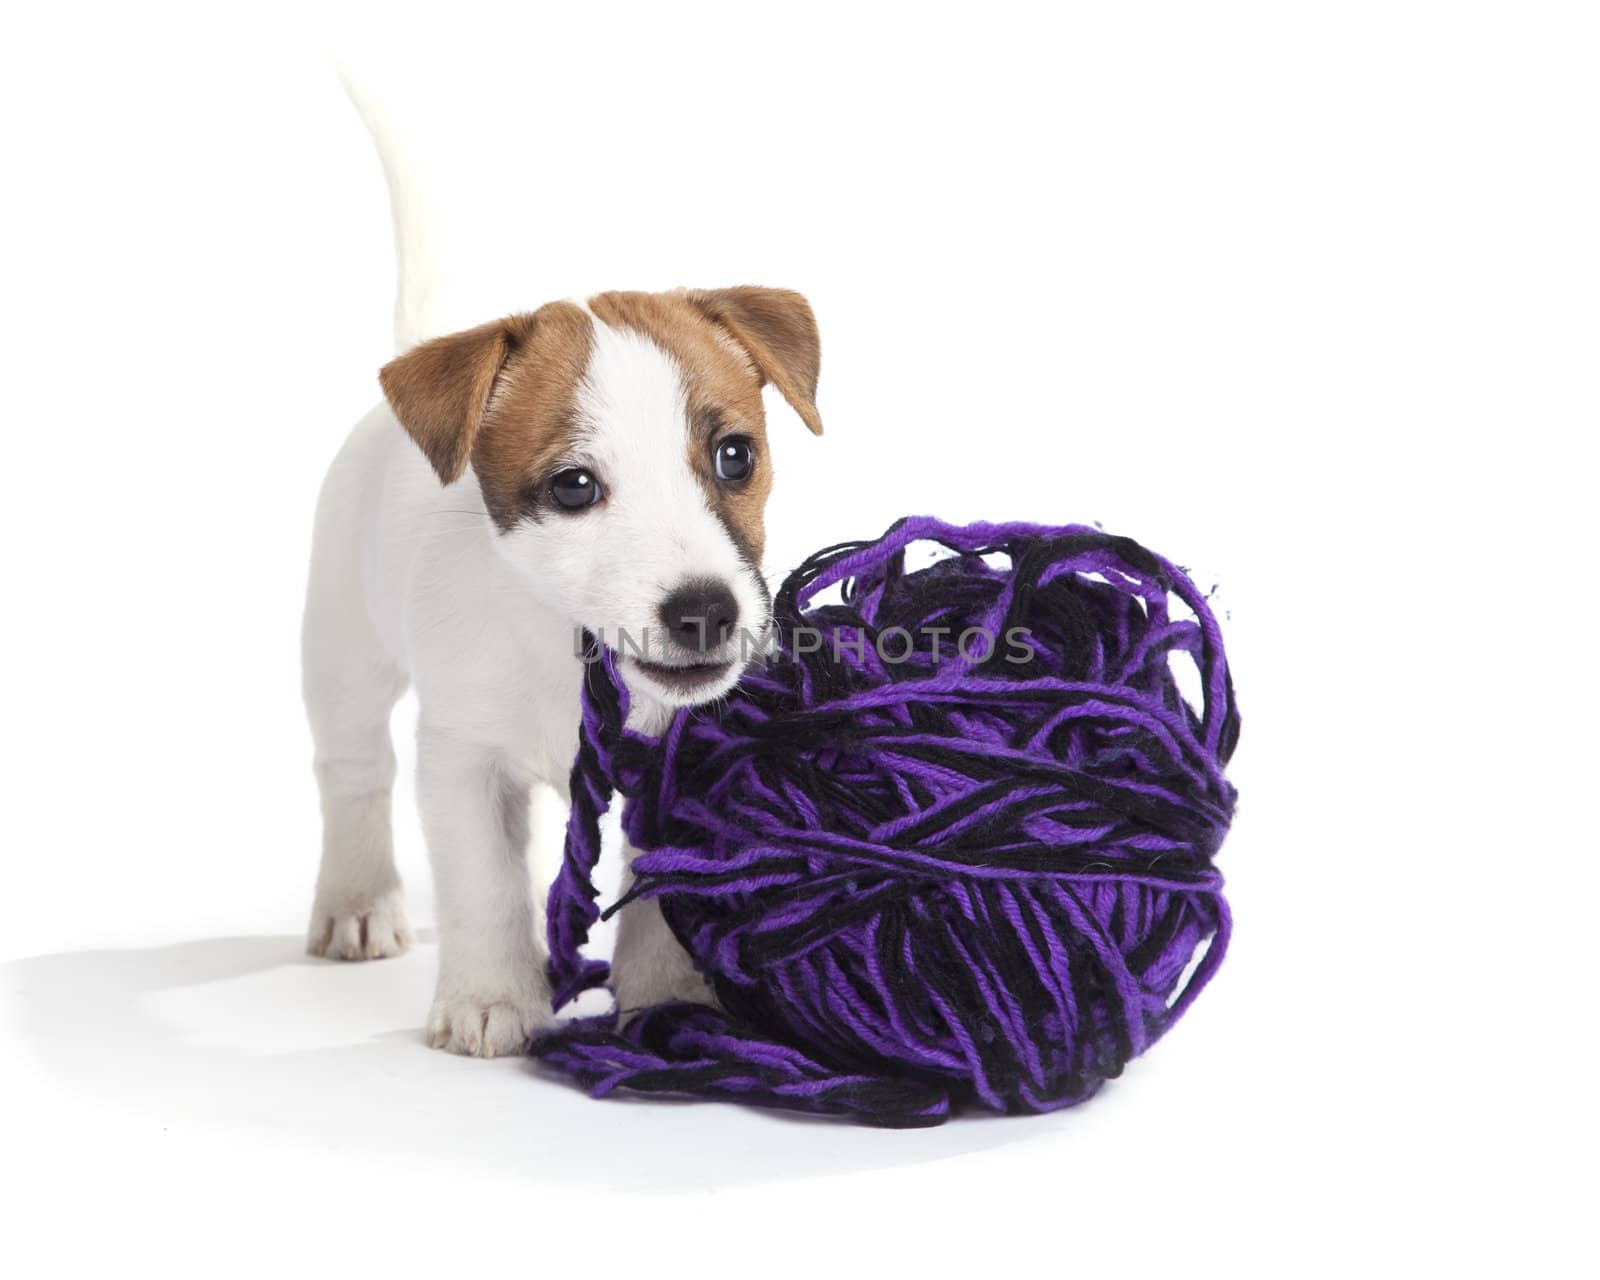 isolated cute jack russell terrier puppy over white background